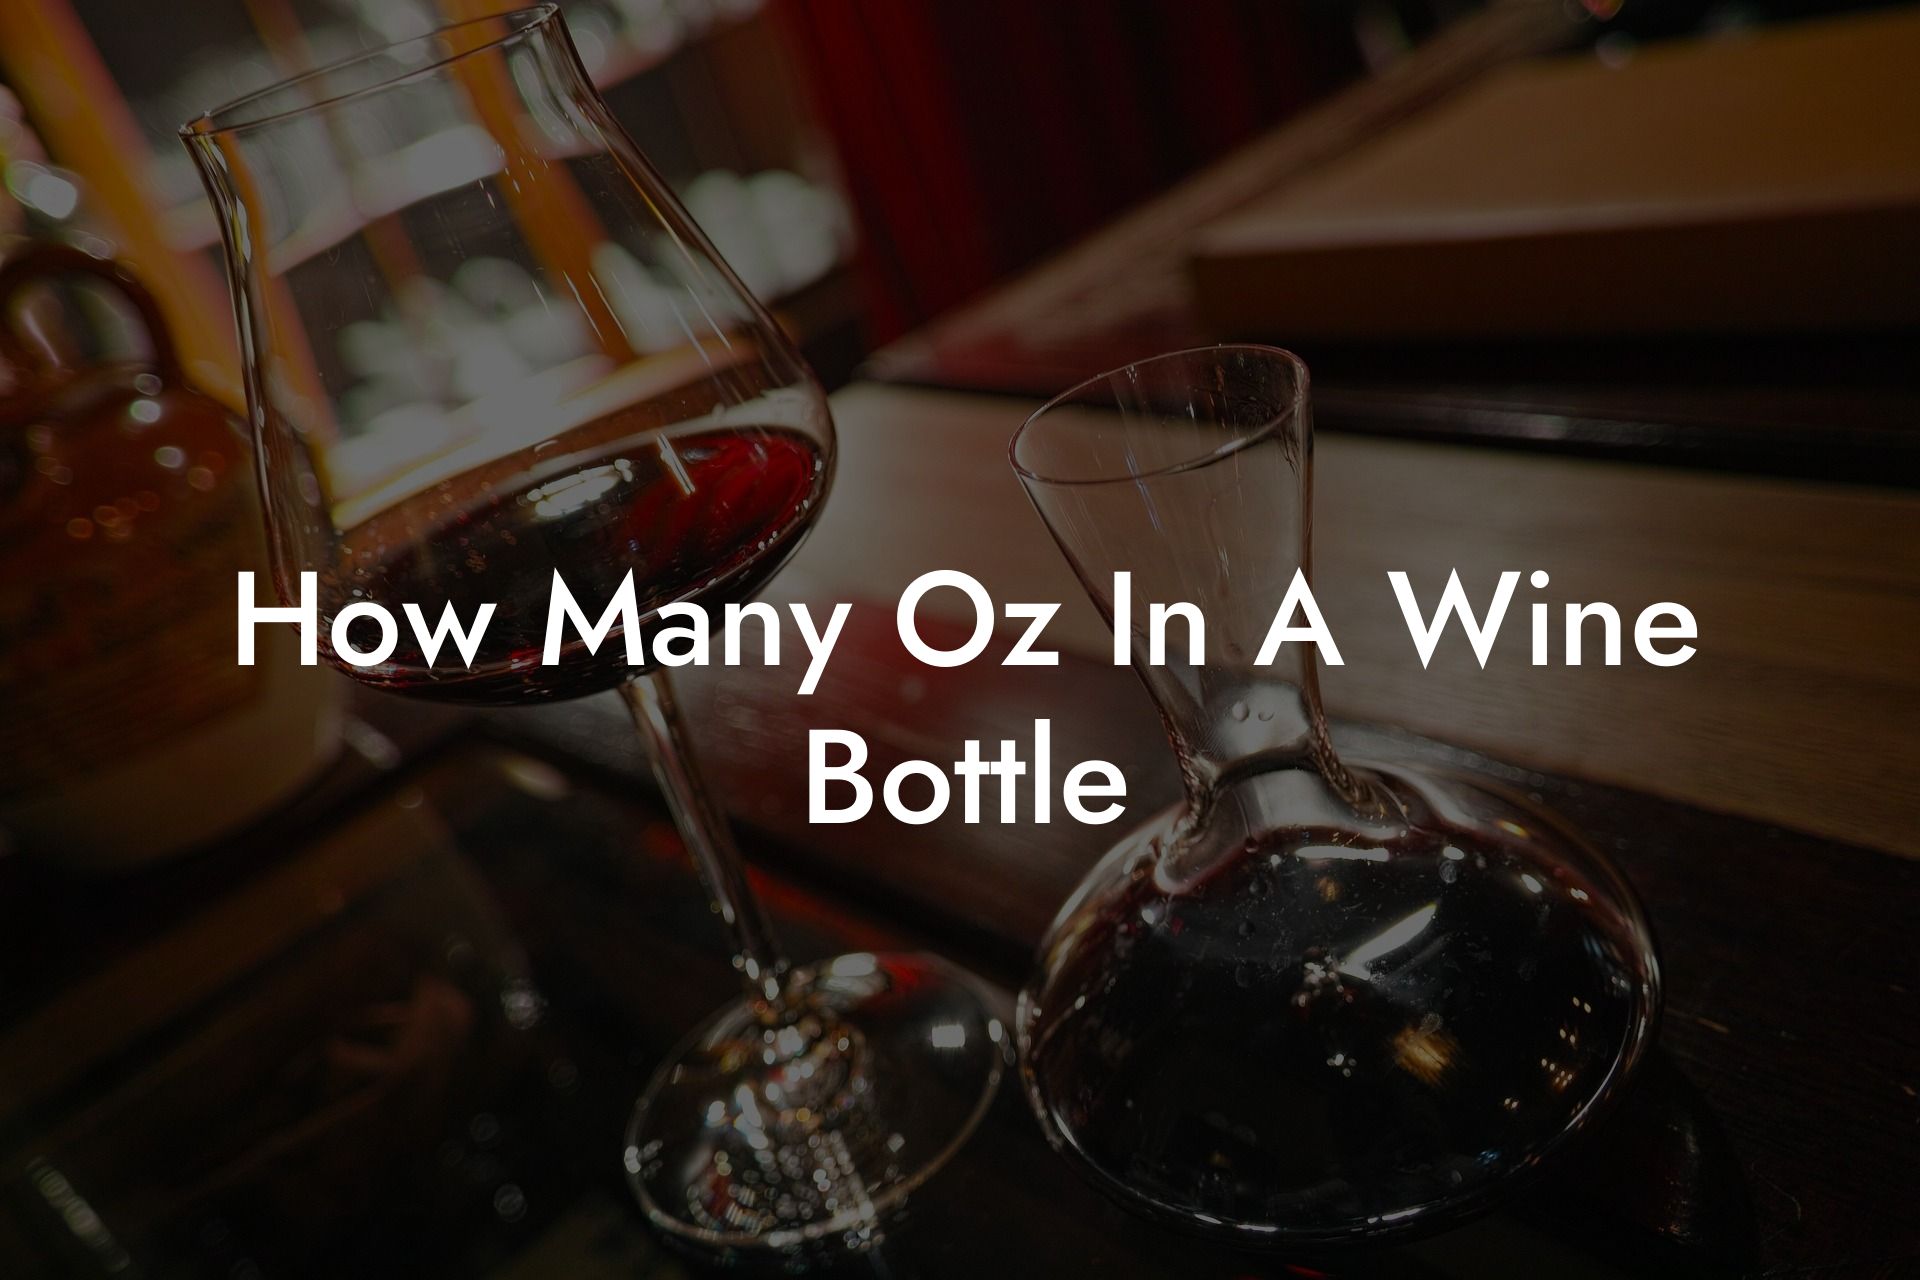 How Many Oz In A Wine Bottle